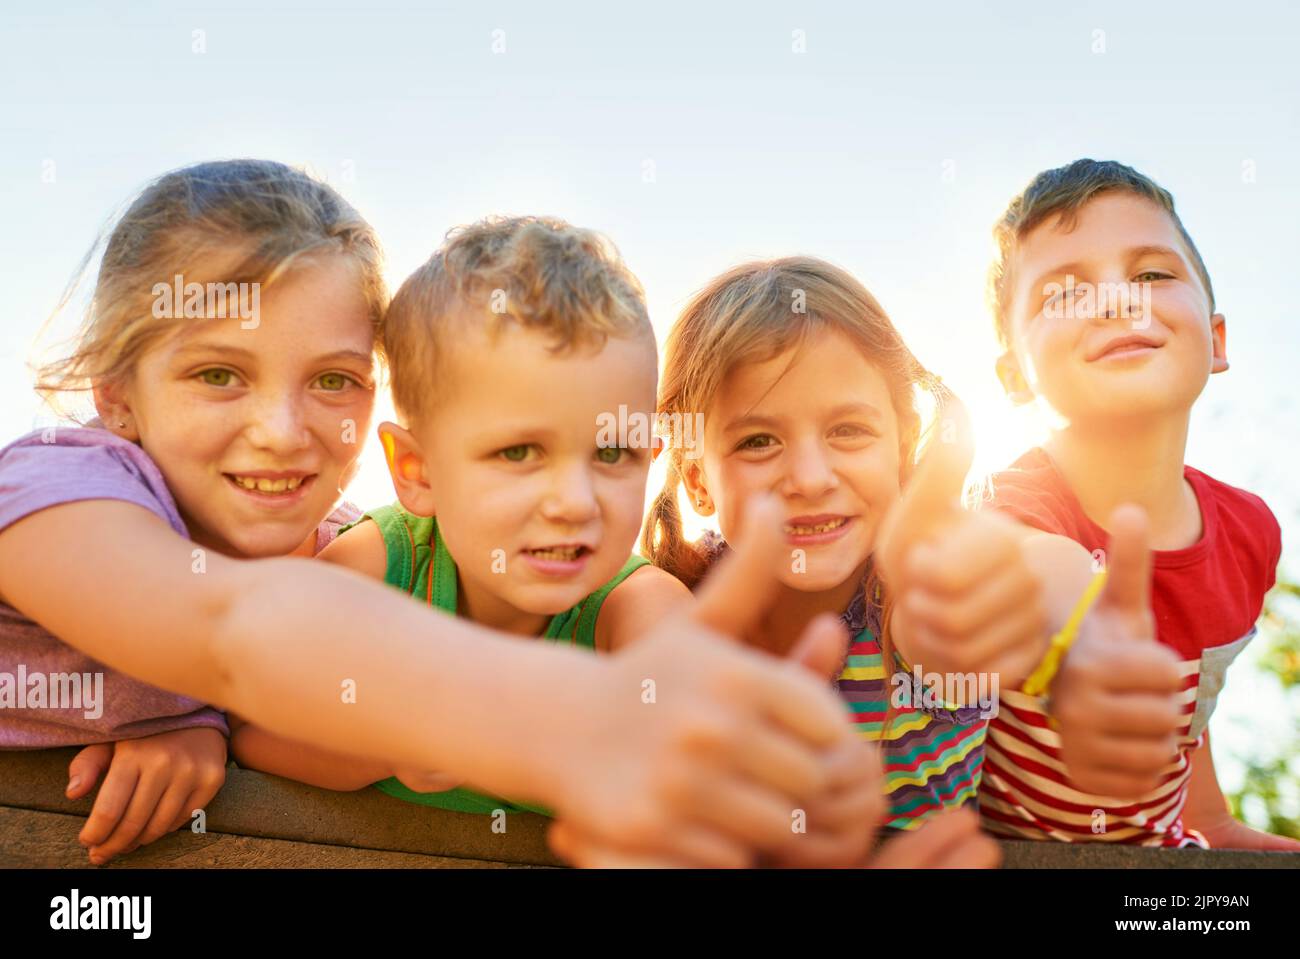 Playtime is the best time. Portrait of a group of little children showing thumbs up while playing together outdoors. Stock Photo